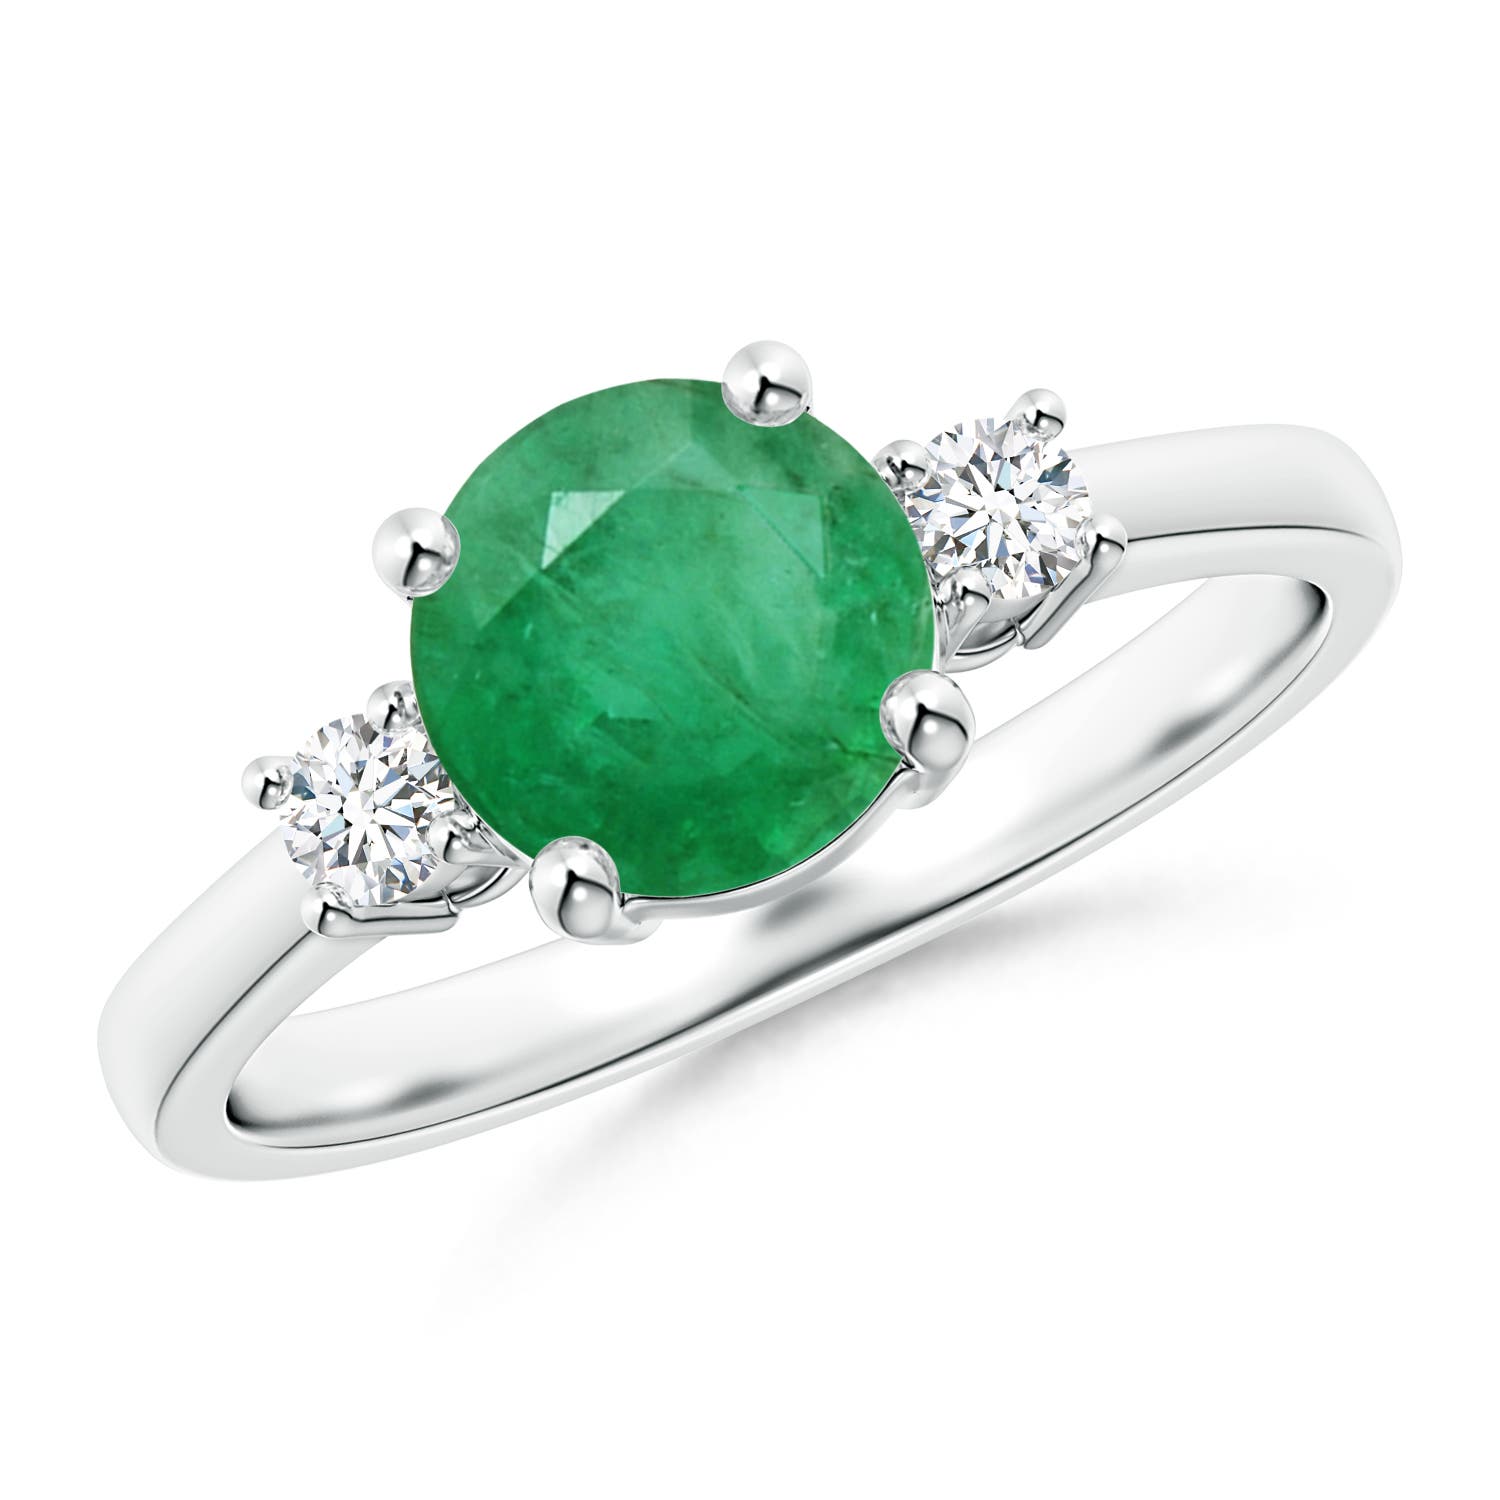 A - Emerald / 1.35 CT / 14 KT White Gold